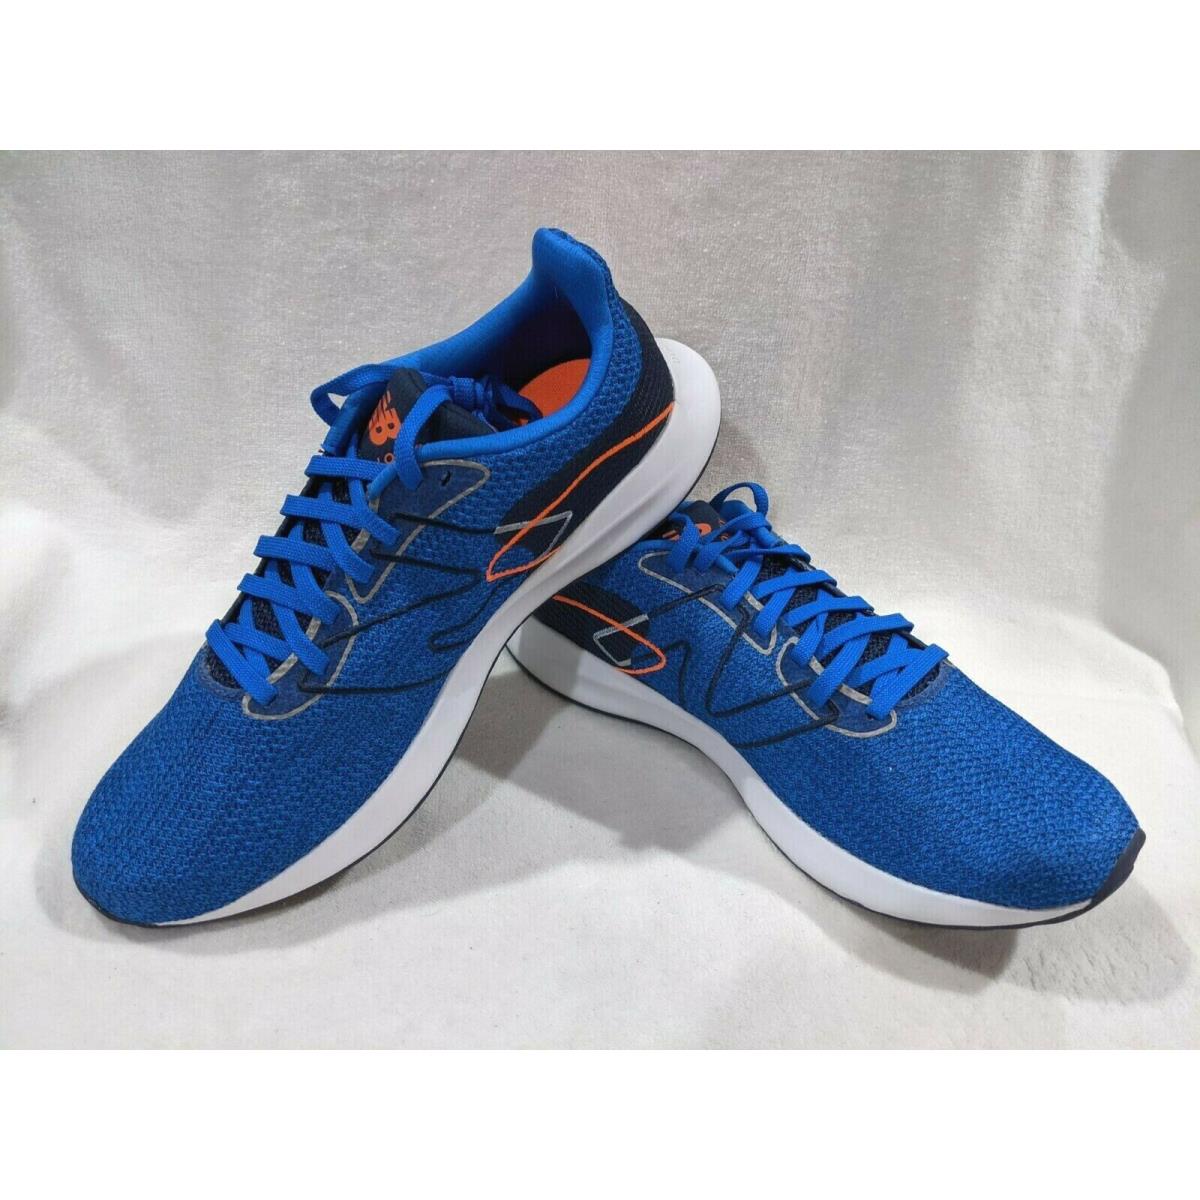 New Balance Men`s Dynasoft Lowky Mlwkylb Laser Blue Running Shoes - Size 10